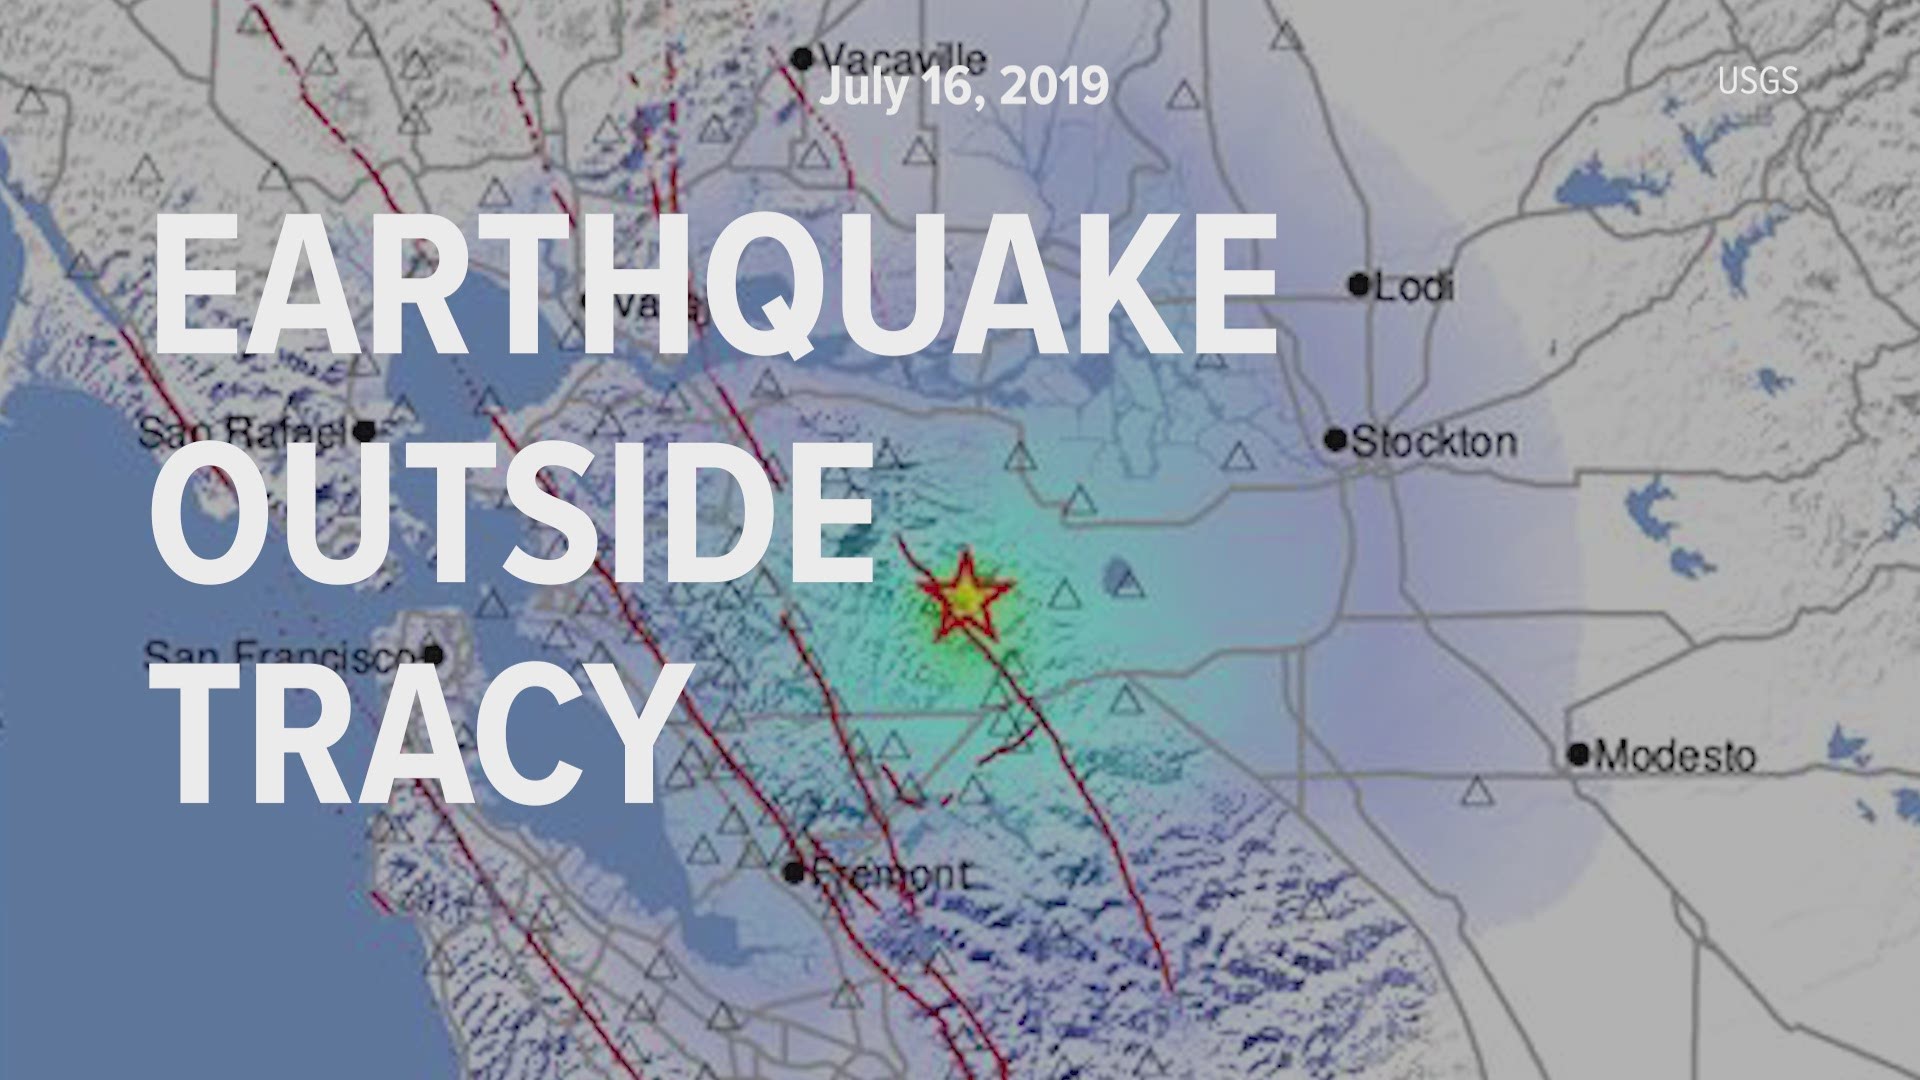 An earthquake with a preliminary 4.3 magnitude rattled parts of the San Francisco Bay Area. There are no immediate reports of damage, but residents in Tracy reported feeling the shaking.